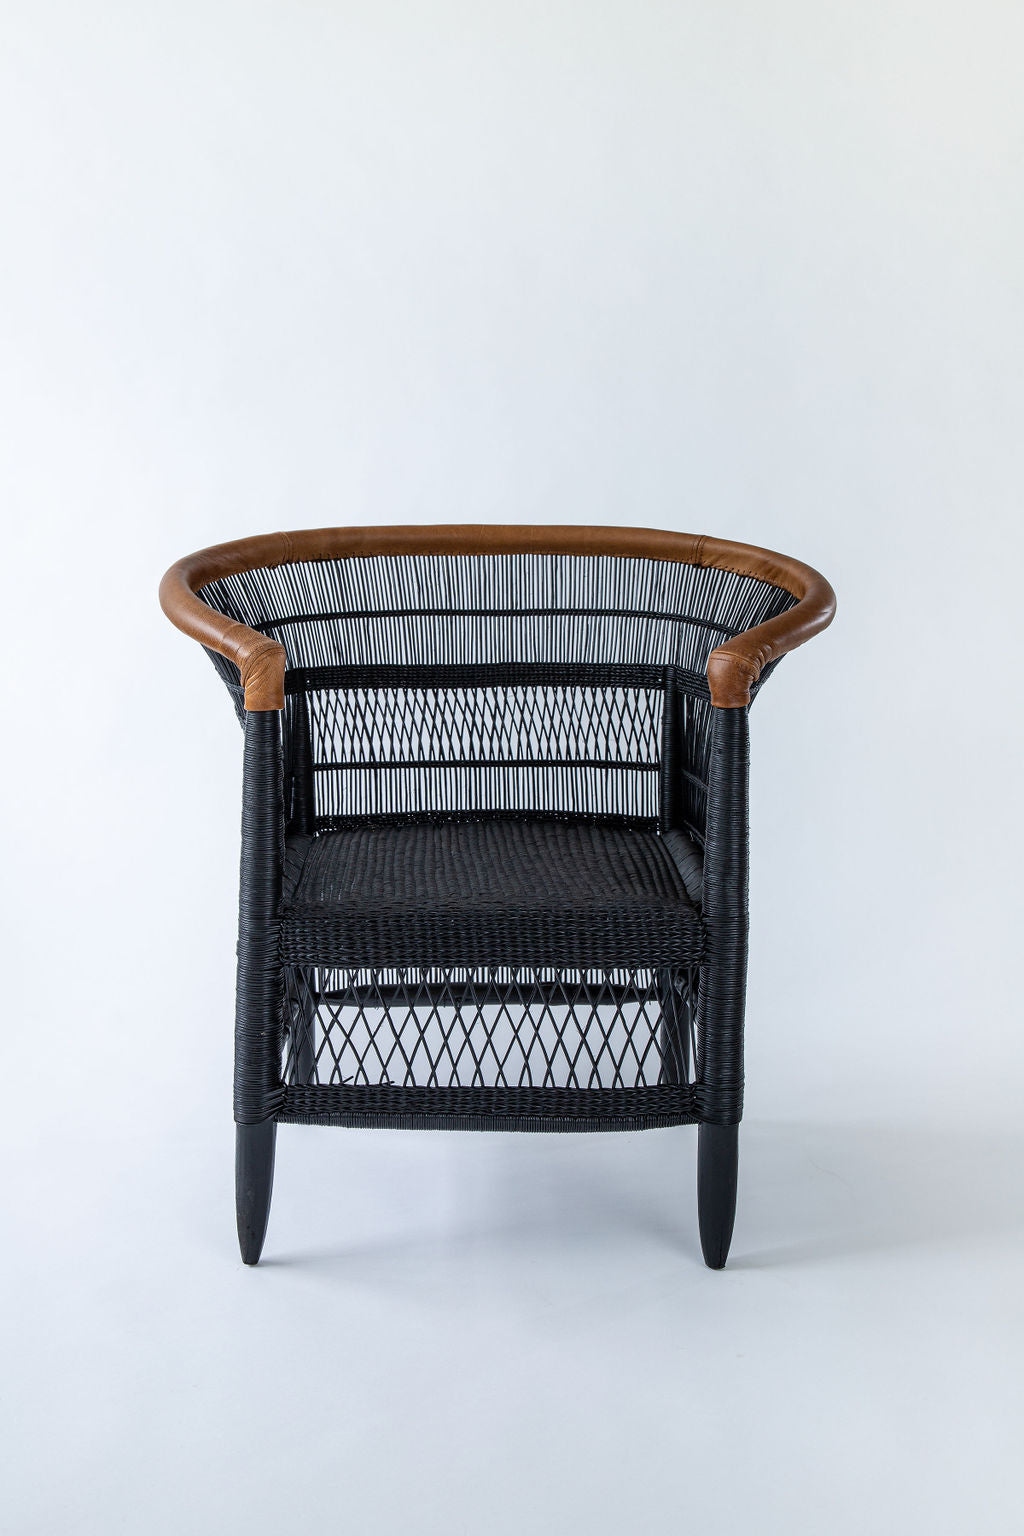 Traditional 1-seater Malawi Cane Chair with Leather Trim